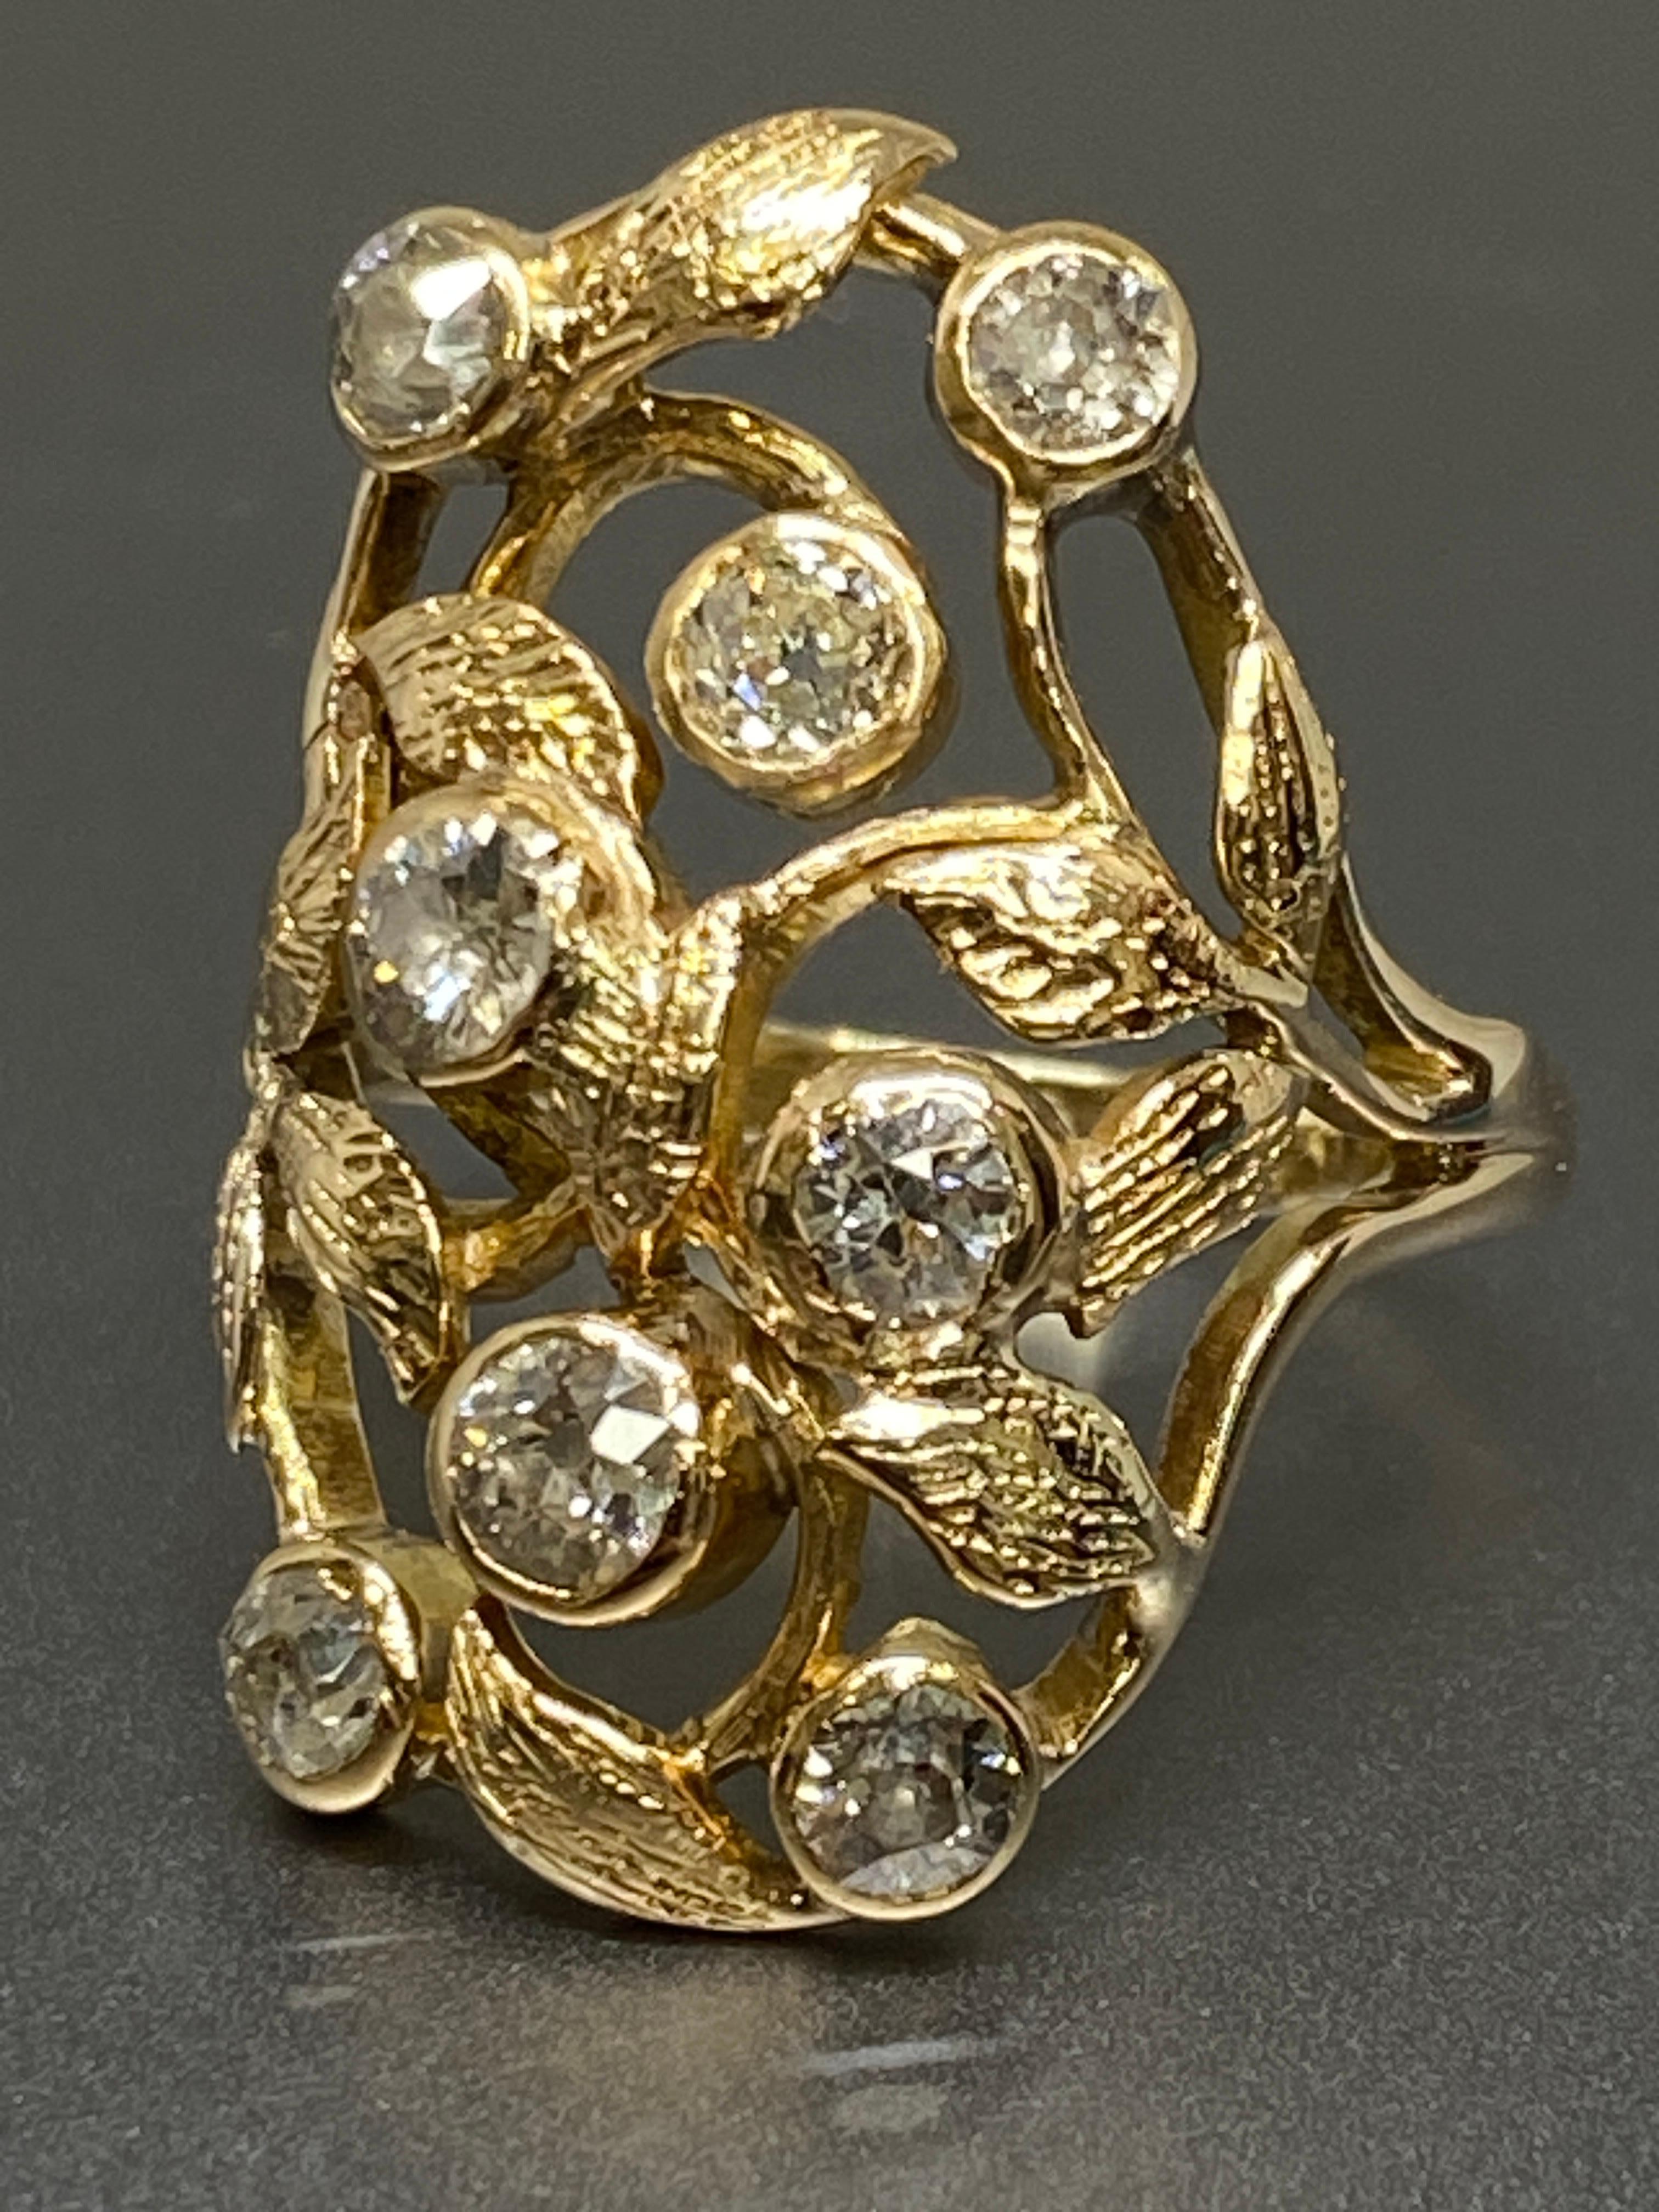 Up for your consideration we have this sublime nature-inspired ring dating back to the turn-of-the-twentieth century - circa 1900. 

A cluster of bright-white old european cut sparkling diamonds together weighing 1.10 carat, are nestled between